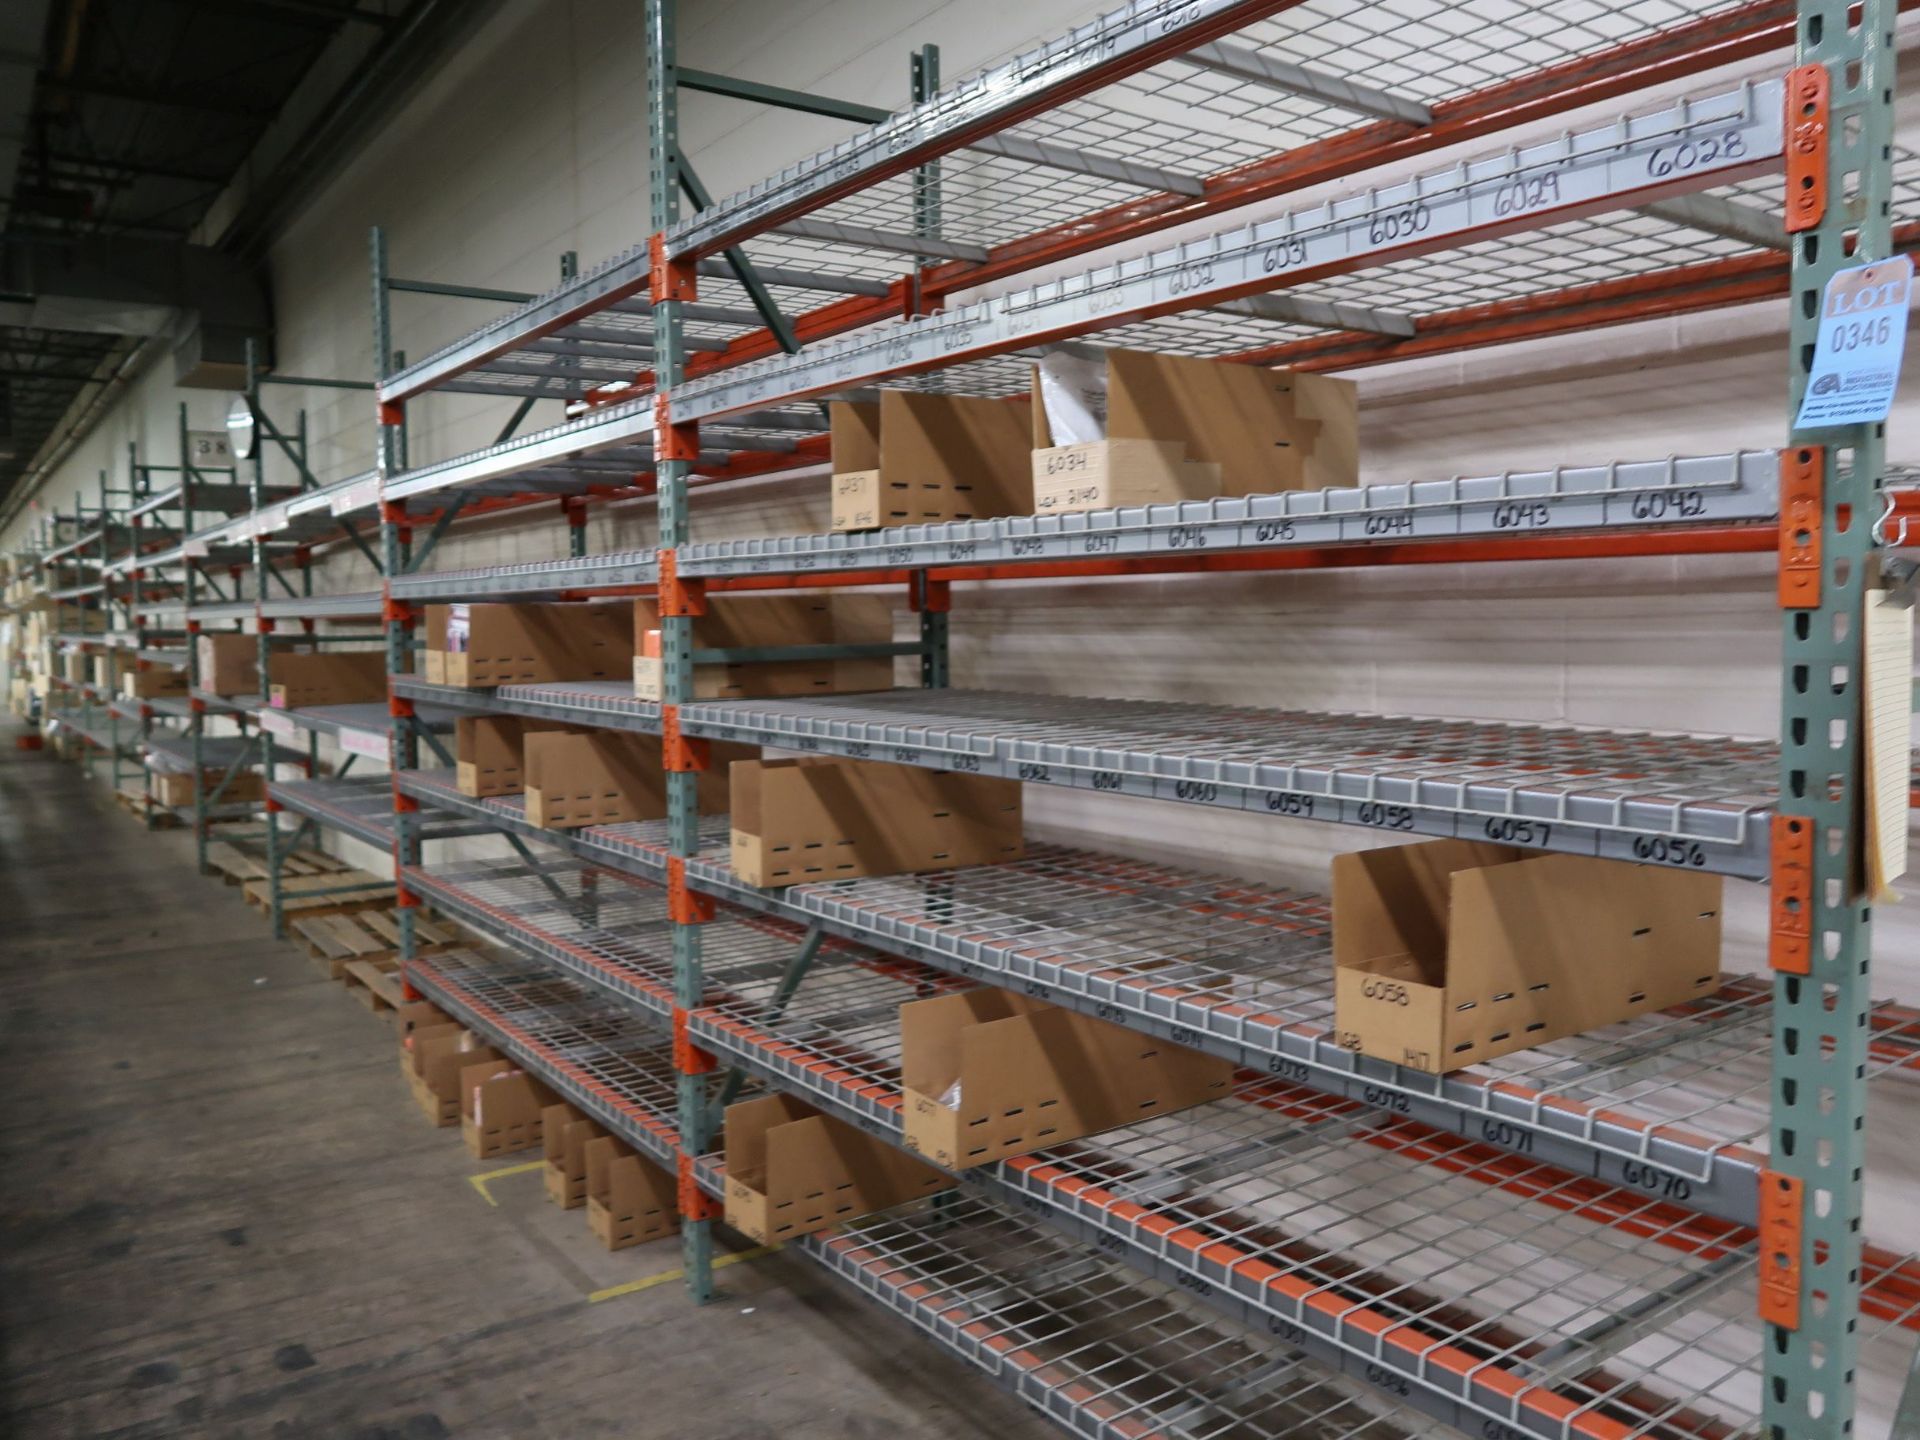 SECTIONS 96" X 30" X 120" ADJUSTABLE BEAM PALLET RACK; (15) 30" X 120" UPRIGHTS, (124) 96"